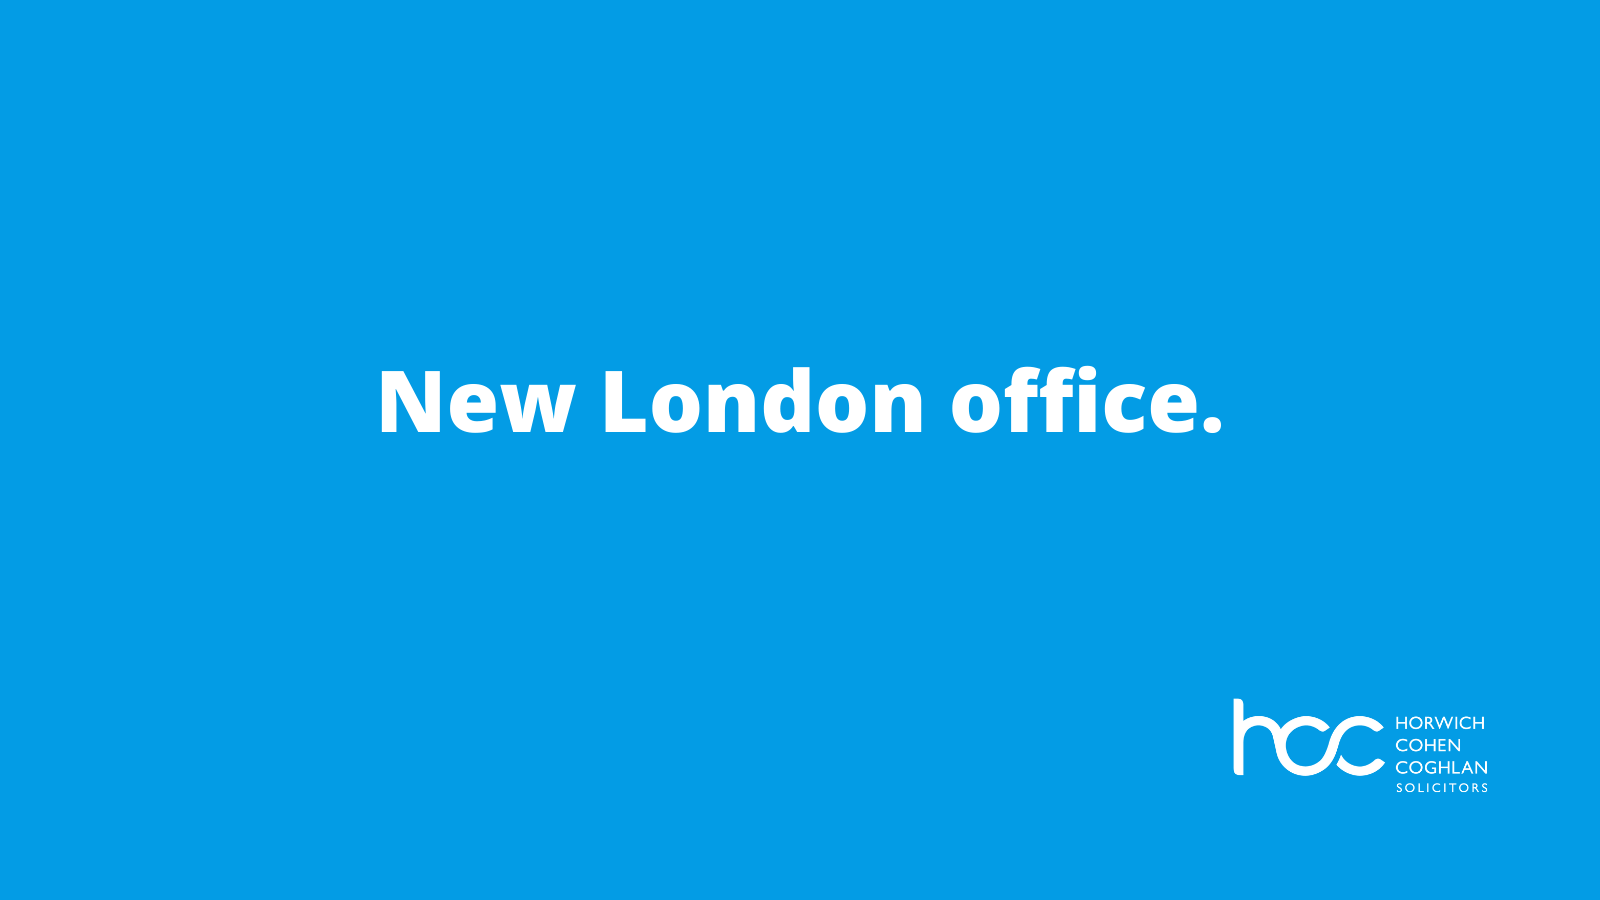 New London office for HCC Solicitors